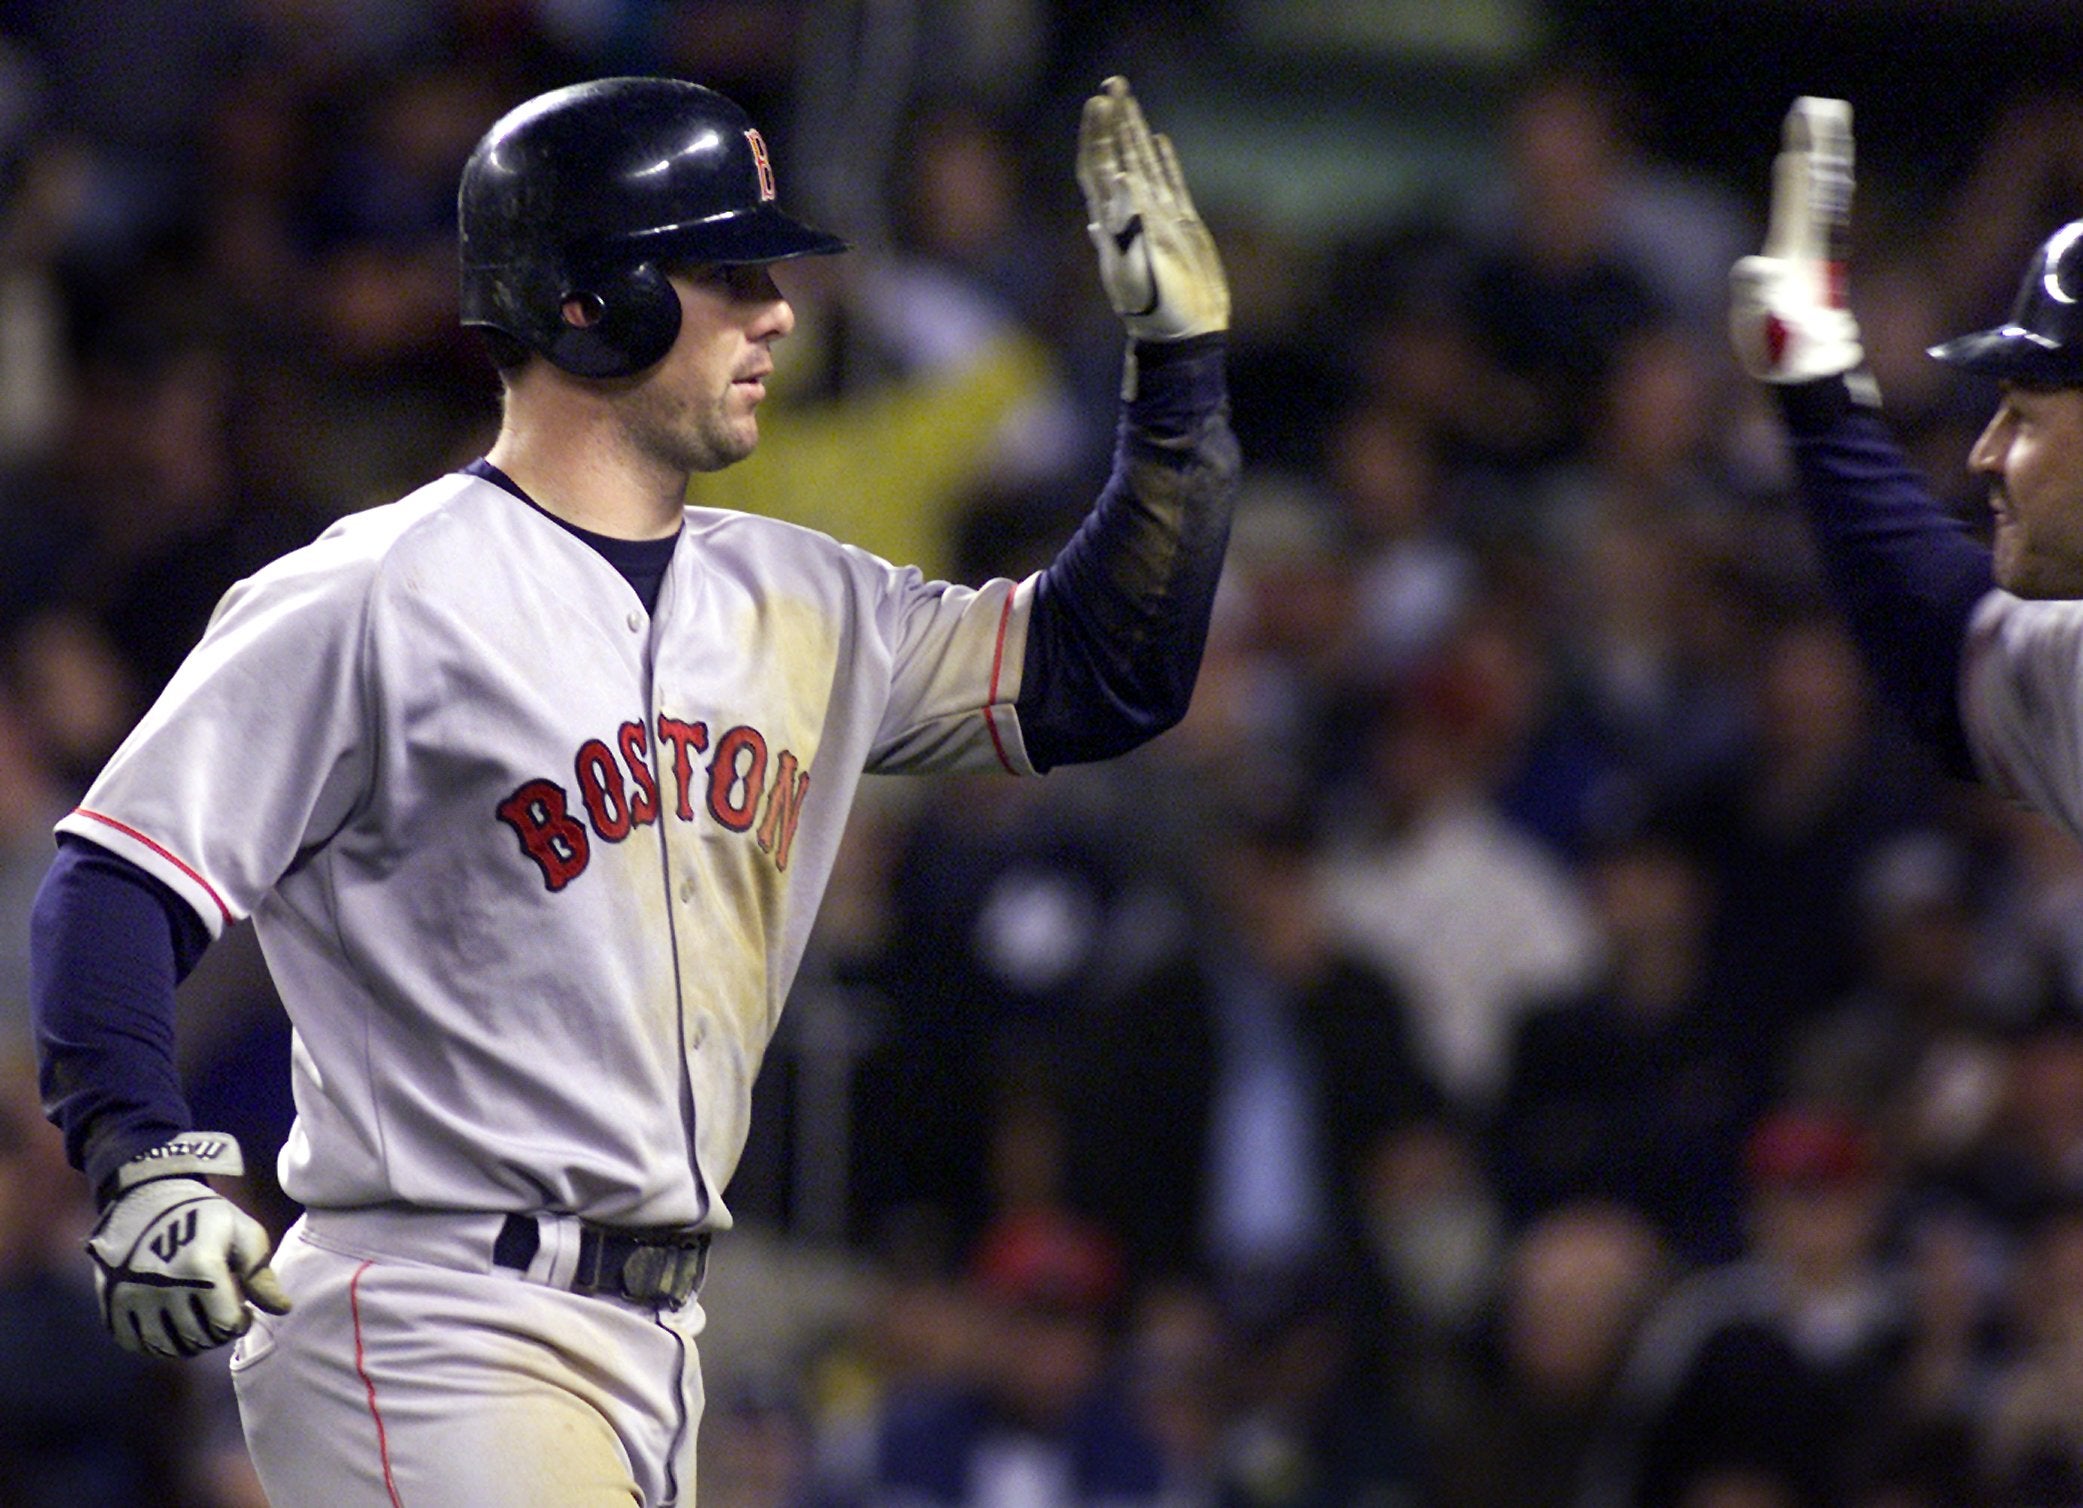 10 Unforgettable Moments From Red Sox-Yankees 2004 ALCS Game 7